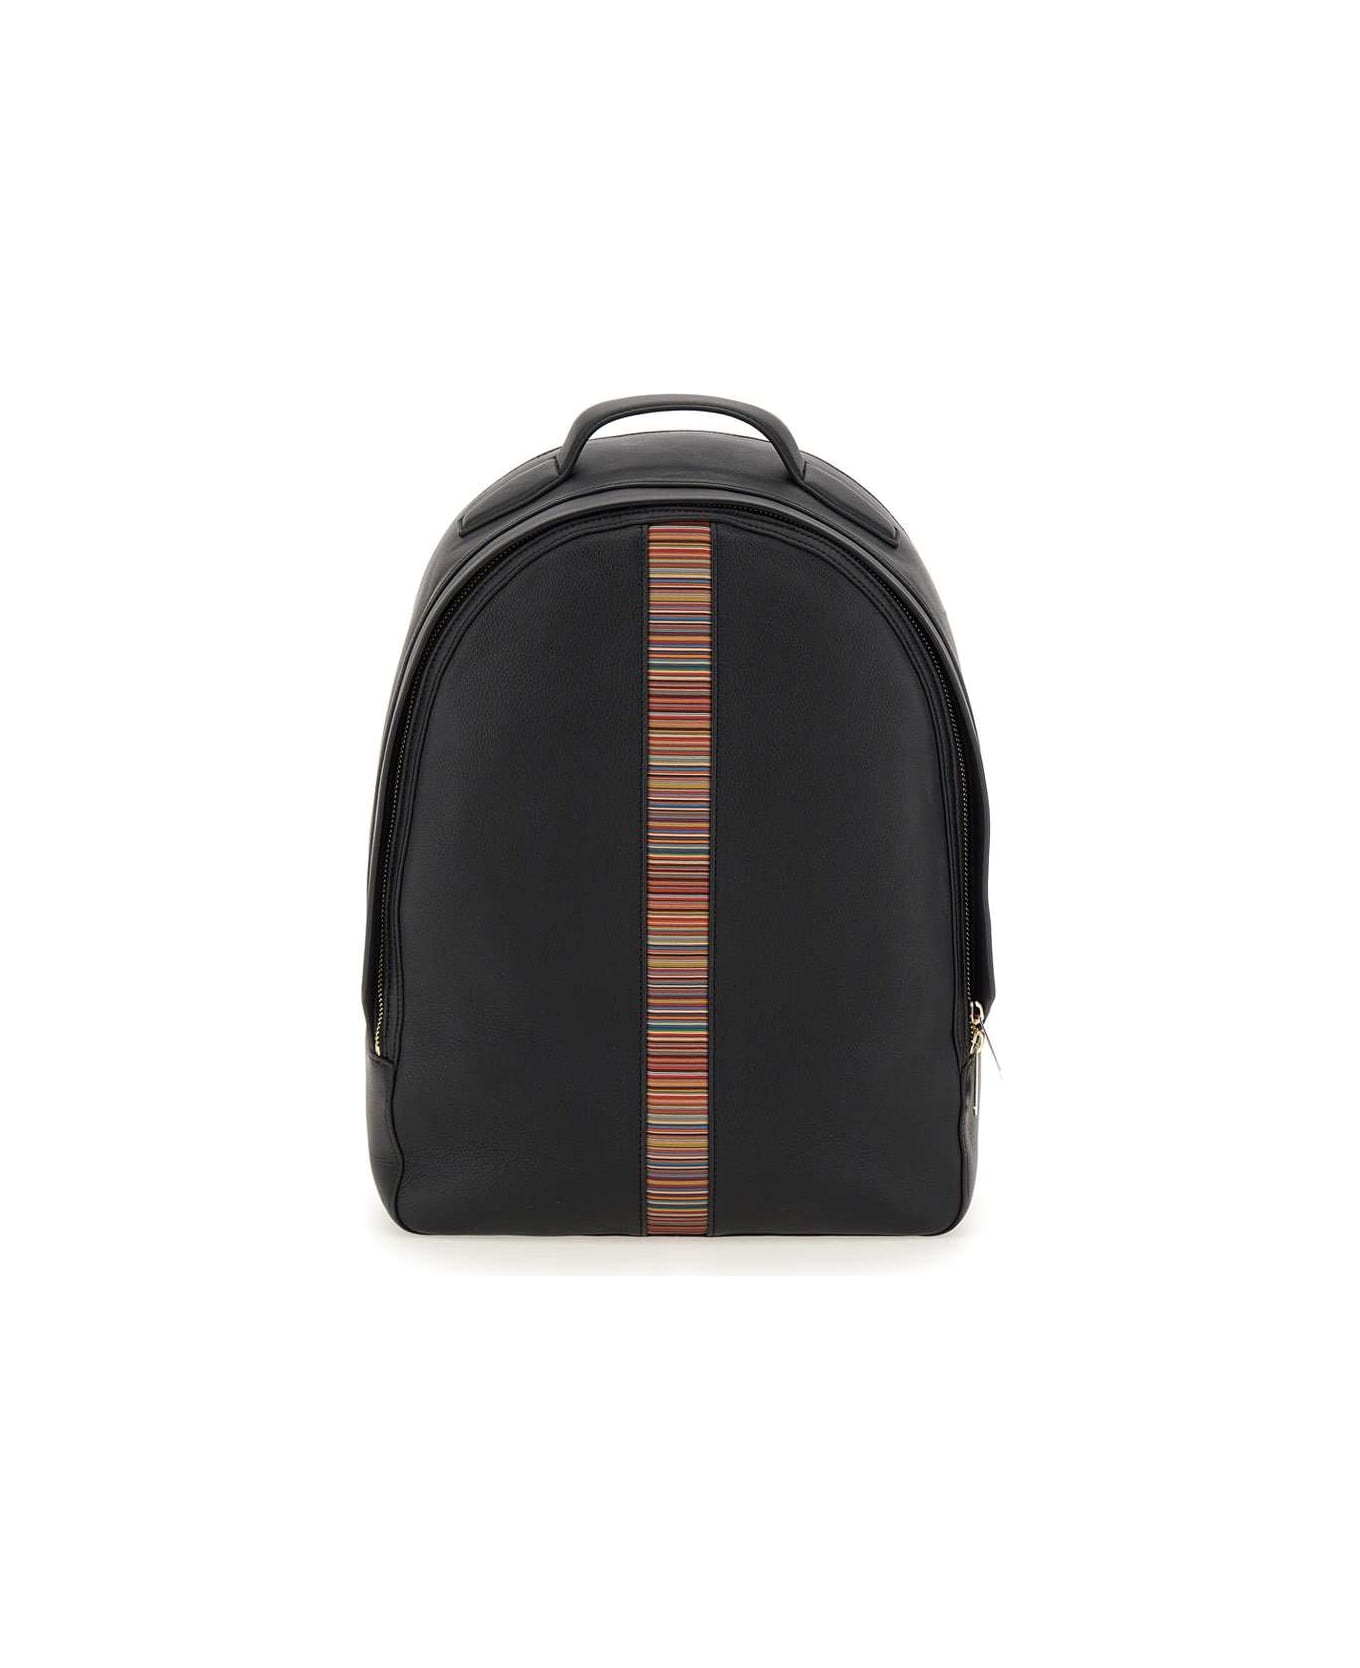 Paul Smith 'london' Leather Backpack - BLACK